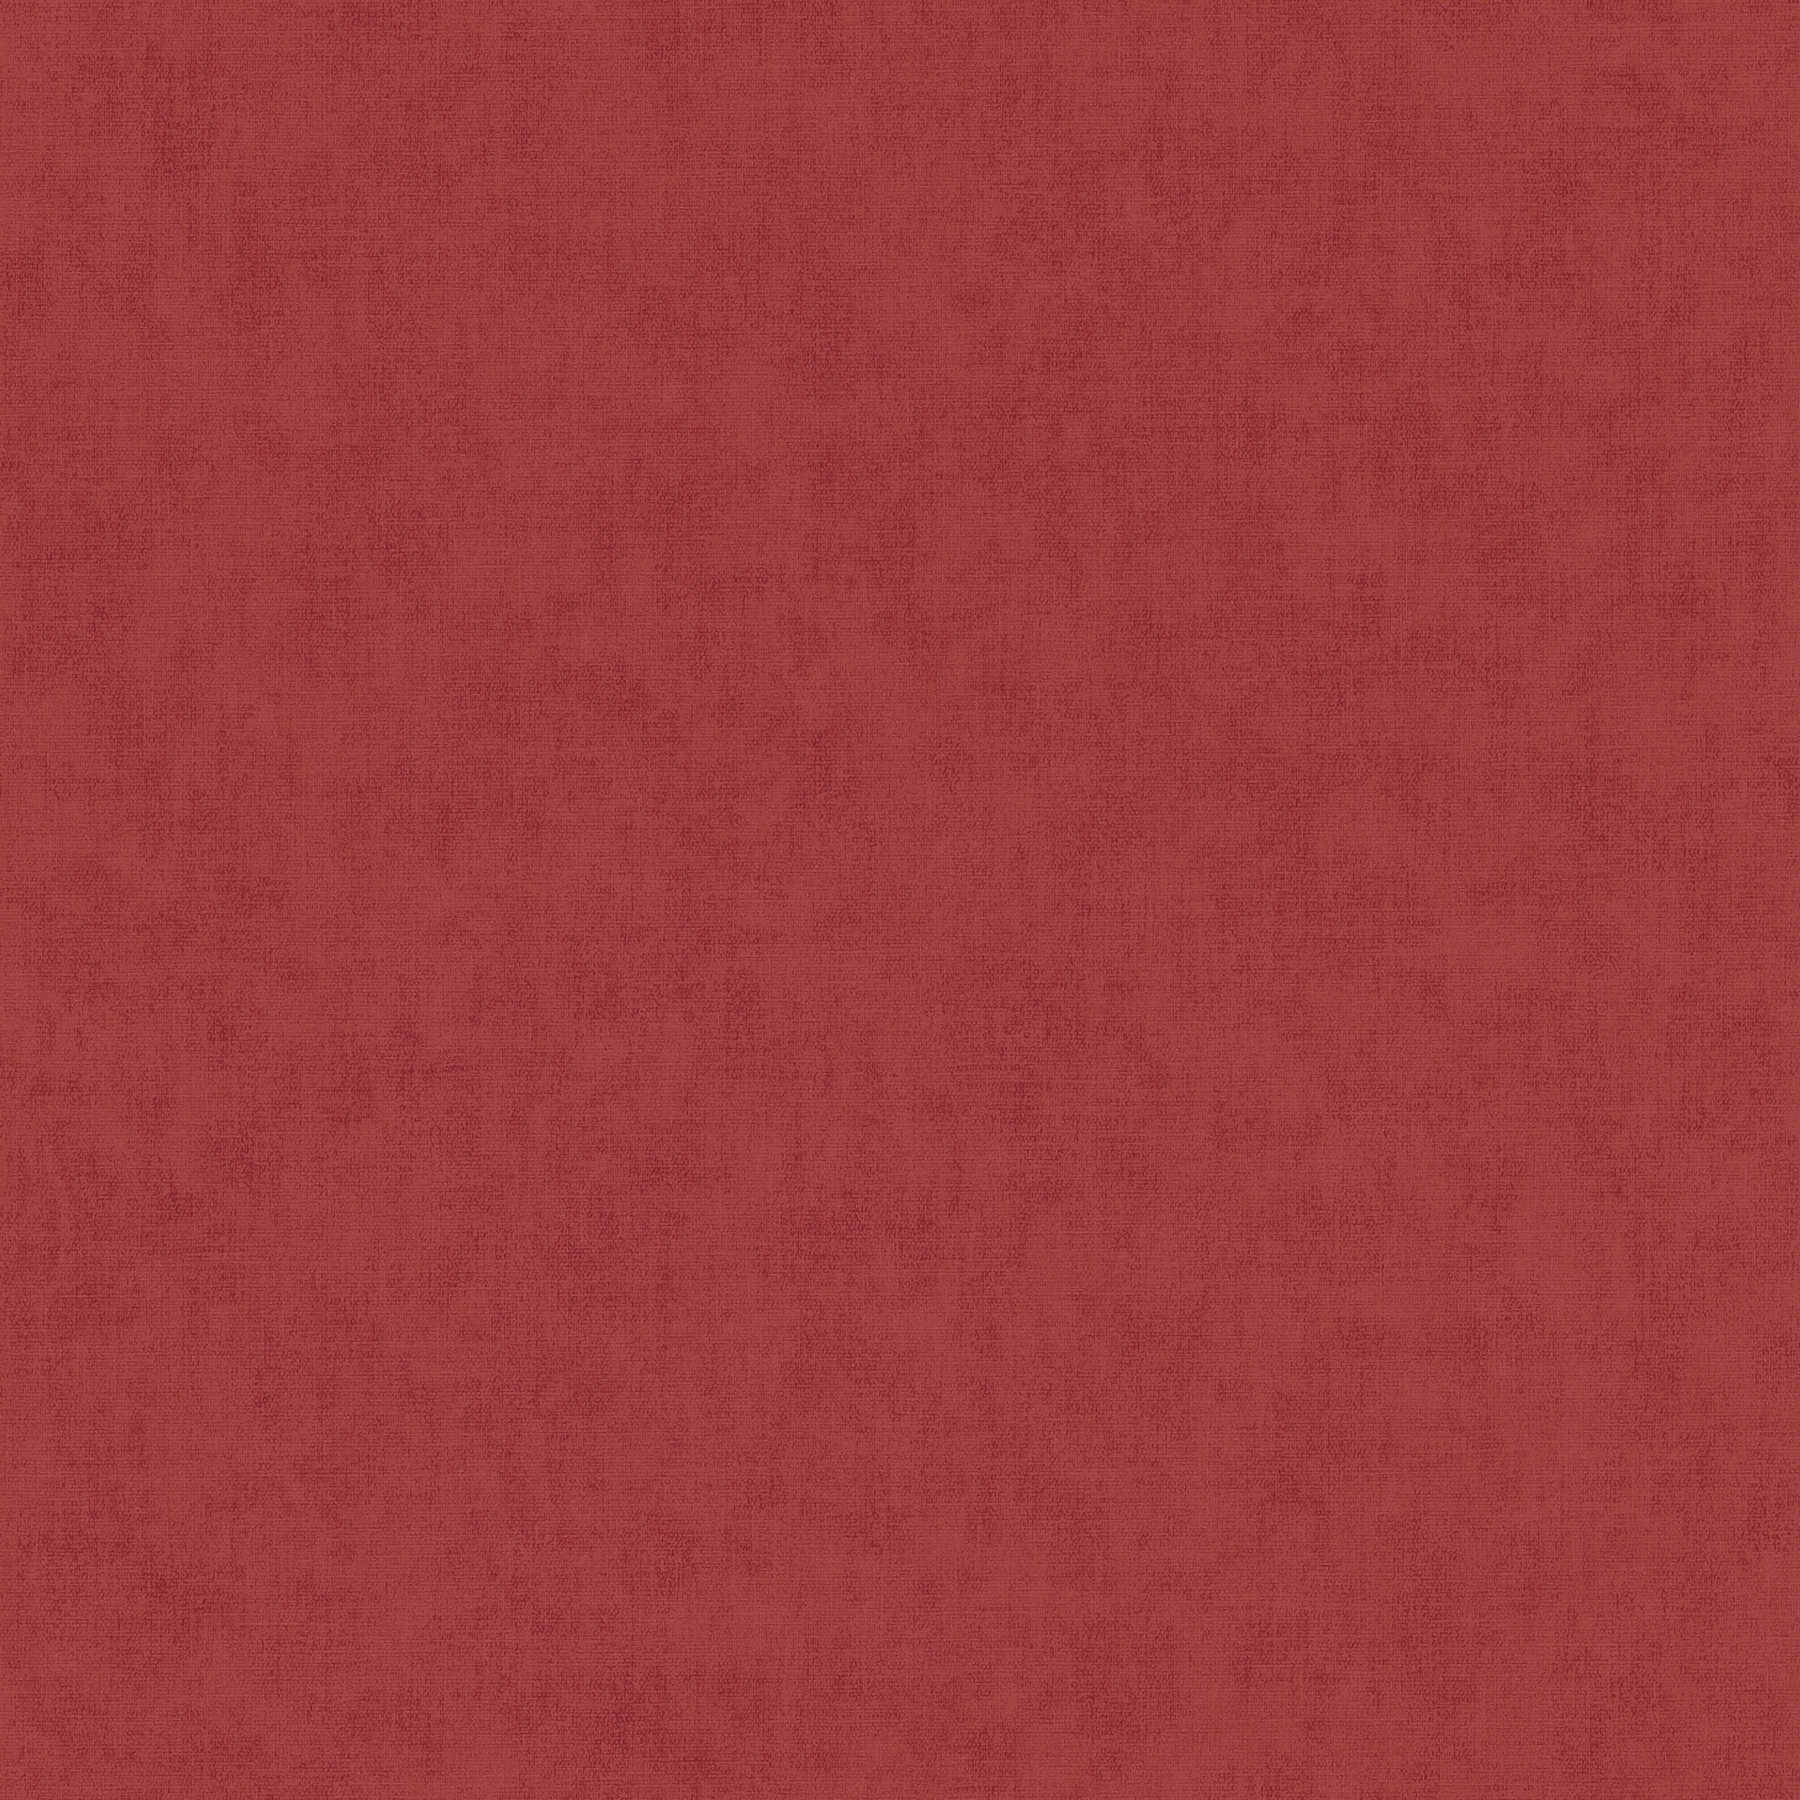 Linen look non-woven wallpaper with subtle pattern - red
